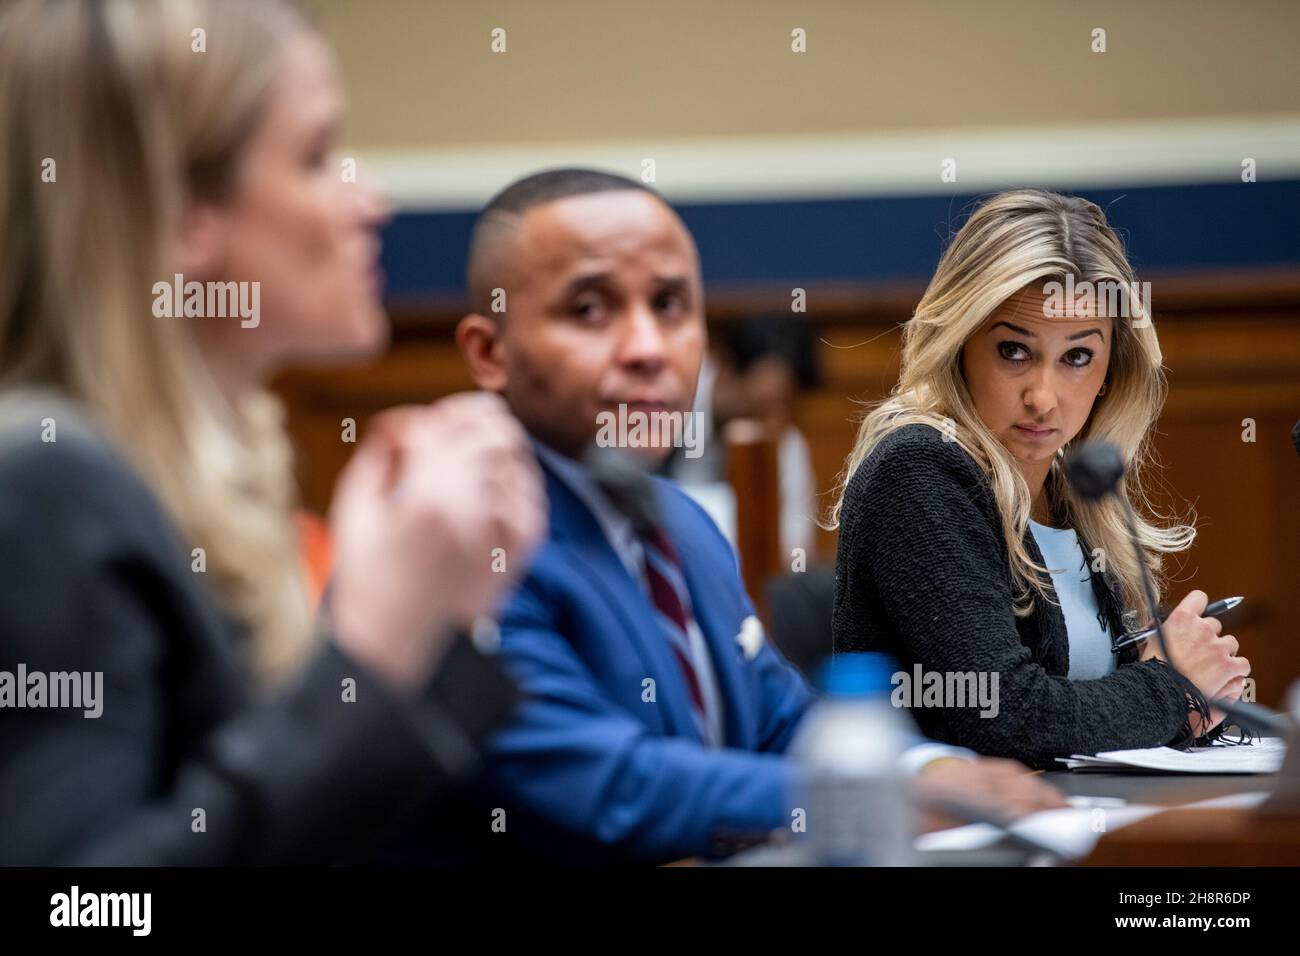 Kara Frederick, Research Fellow in Technology Policy, The Heritage Foundation, right, and Rashad Robinson, President, Color of Change, center, listen while Frances Haugen, Former Facebook Employee, left, responds to questions during a House Committee on Energy and Commerce | Subcommittee on Communications and Technology hearing âHolding Big Tech Accountable: Targeted Reforms to Techs Legal Immunityâ in the Rayburn House Office Building in Washington, DC, Wednesday, December 1, 2021. Credit: Rod Lamkey/CNP Stock Photo